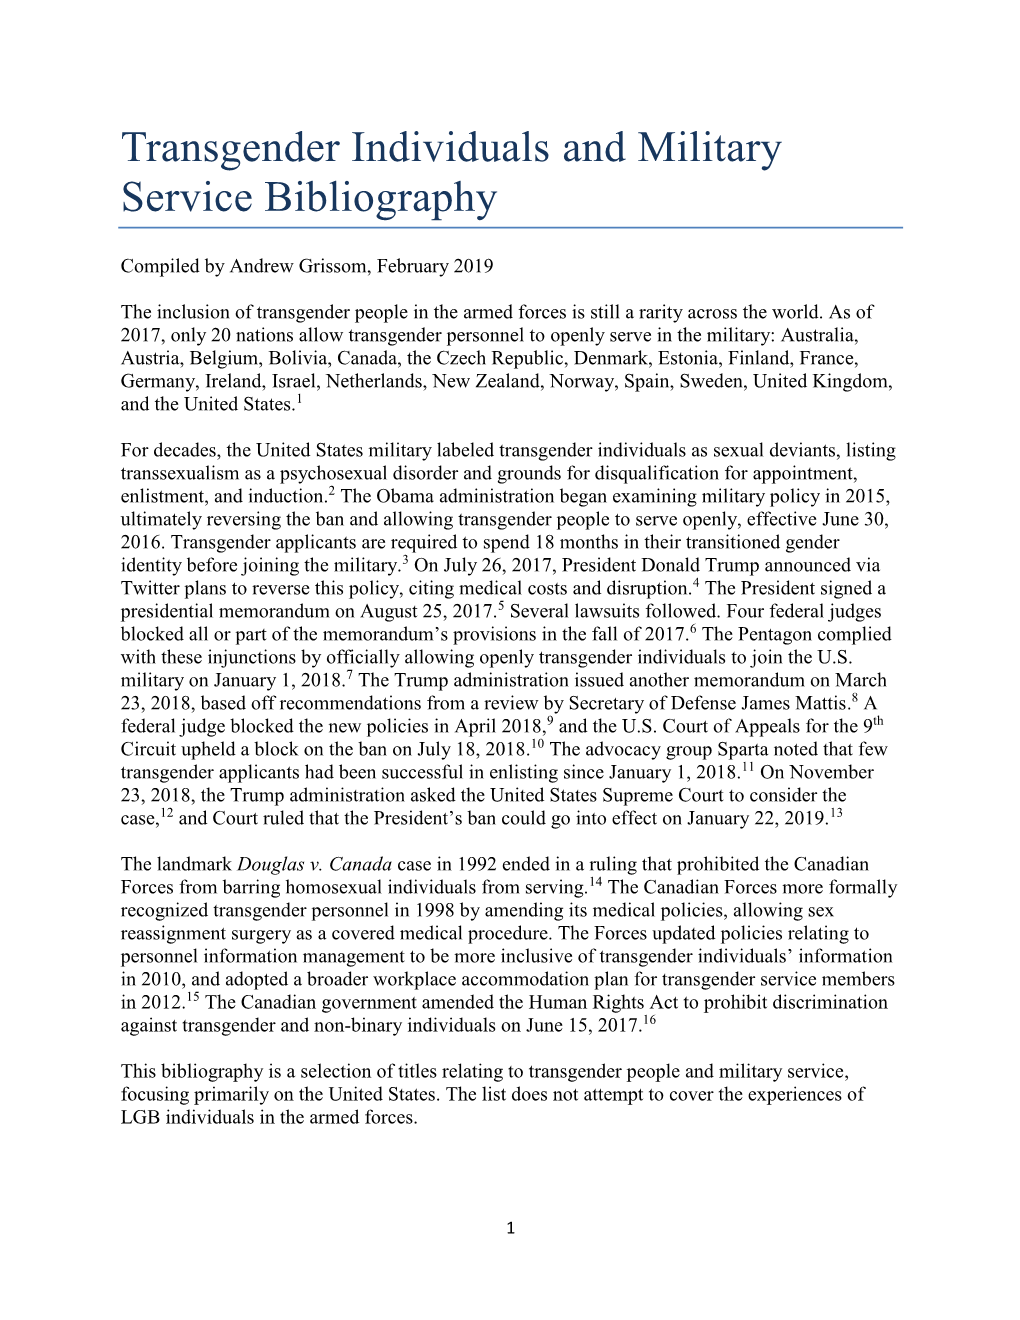 Transgender Individuals and Military Service Bibliography